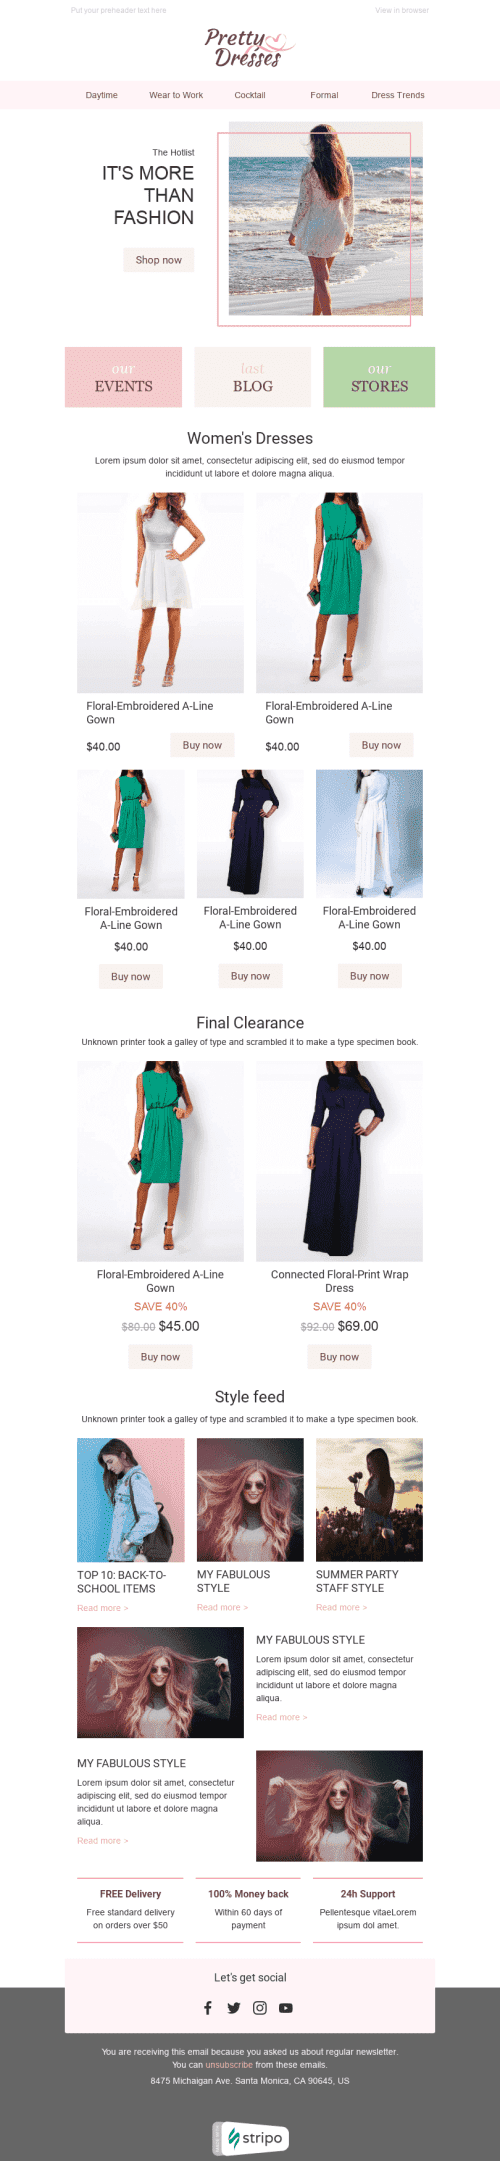 Promo Email Template "Pretty Dresses" for Fashion industry desktop view